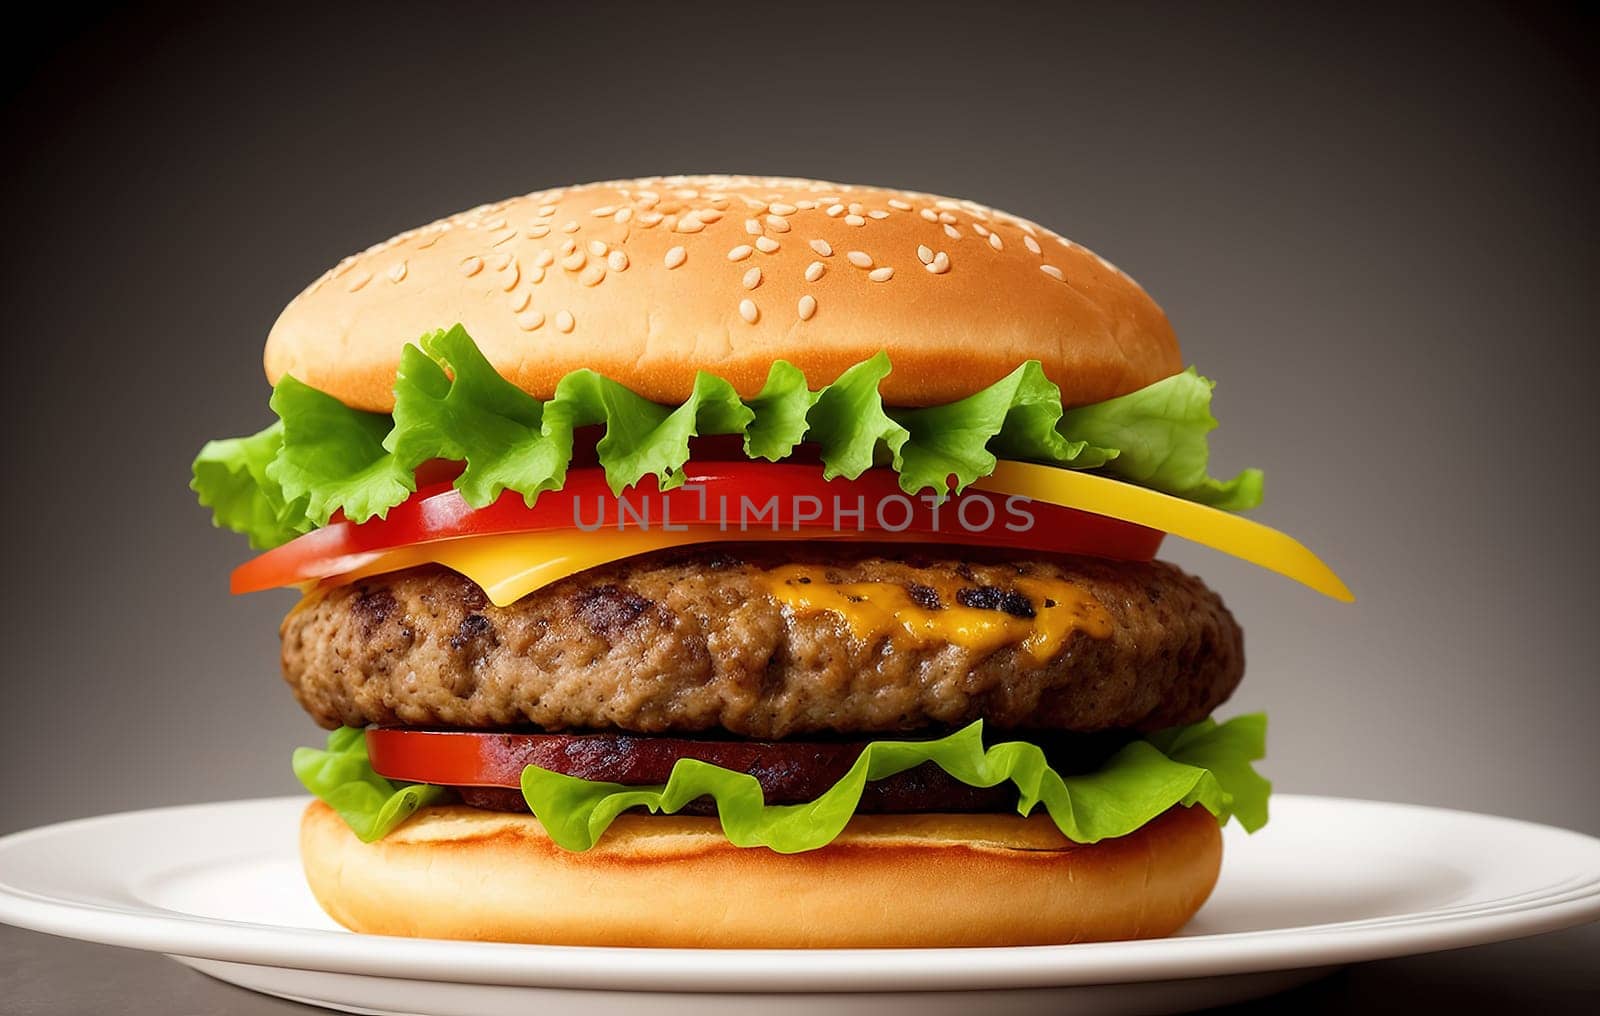 Tasty big Burger on a plate on dark background side view by macroarting